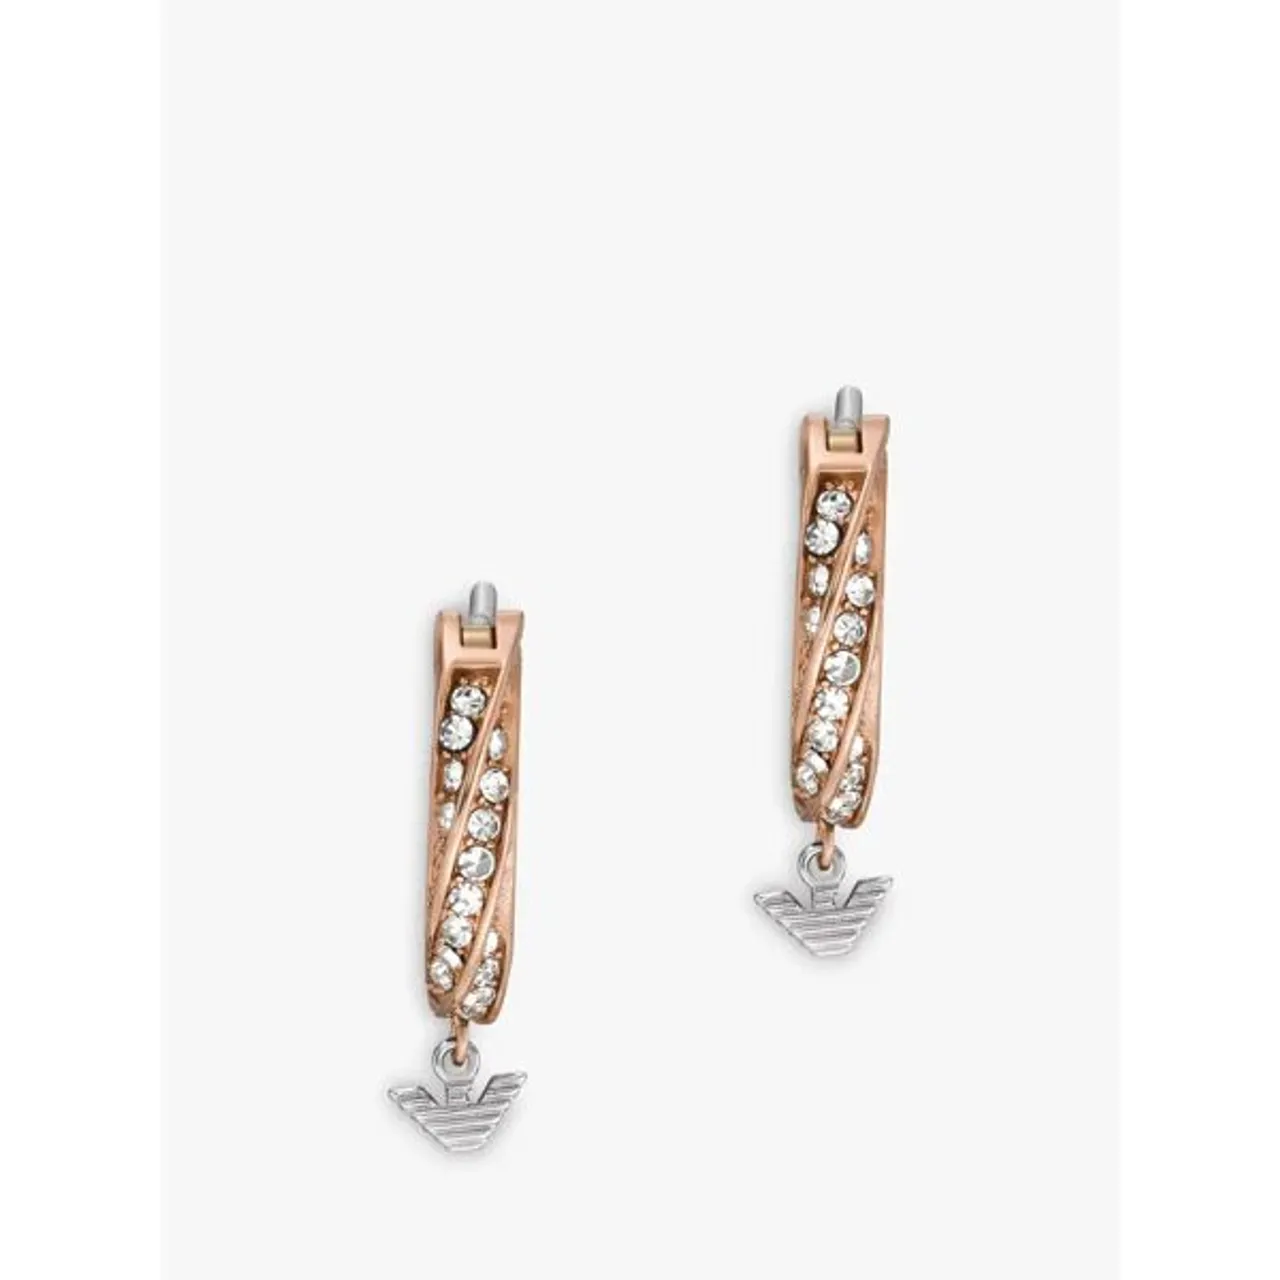 Emporio Armani Hoop Earrings, Rose Gold/Silver - Rose Gold/Silver - Female